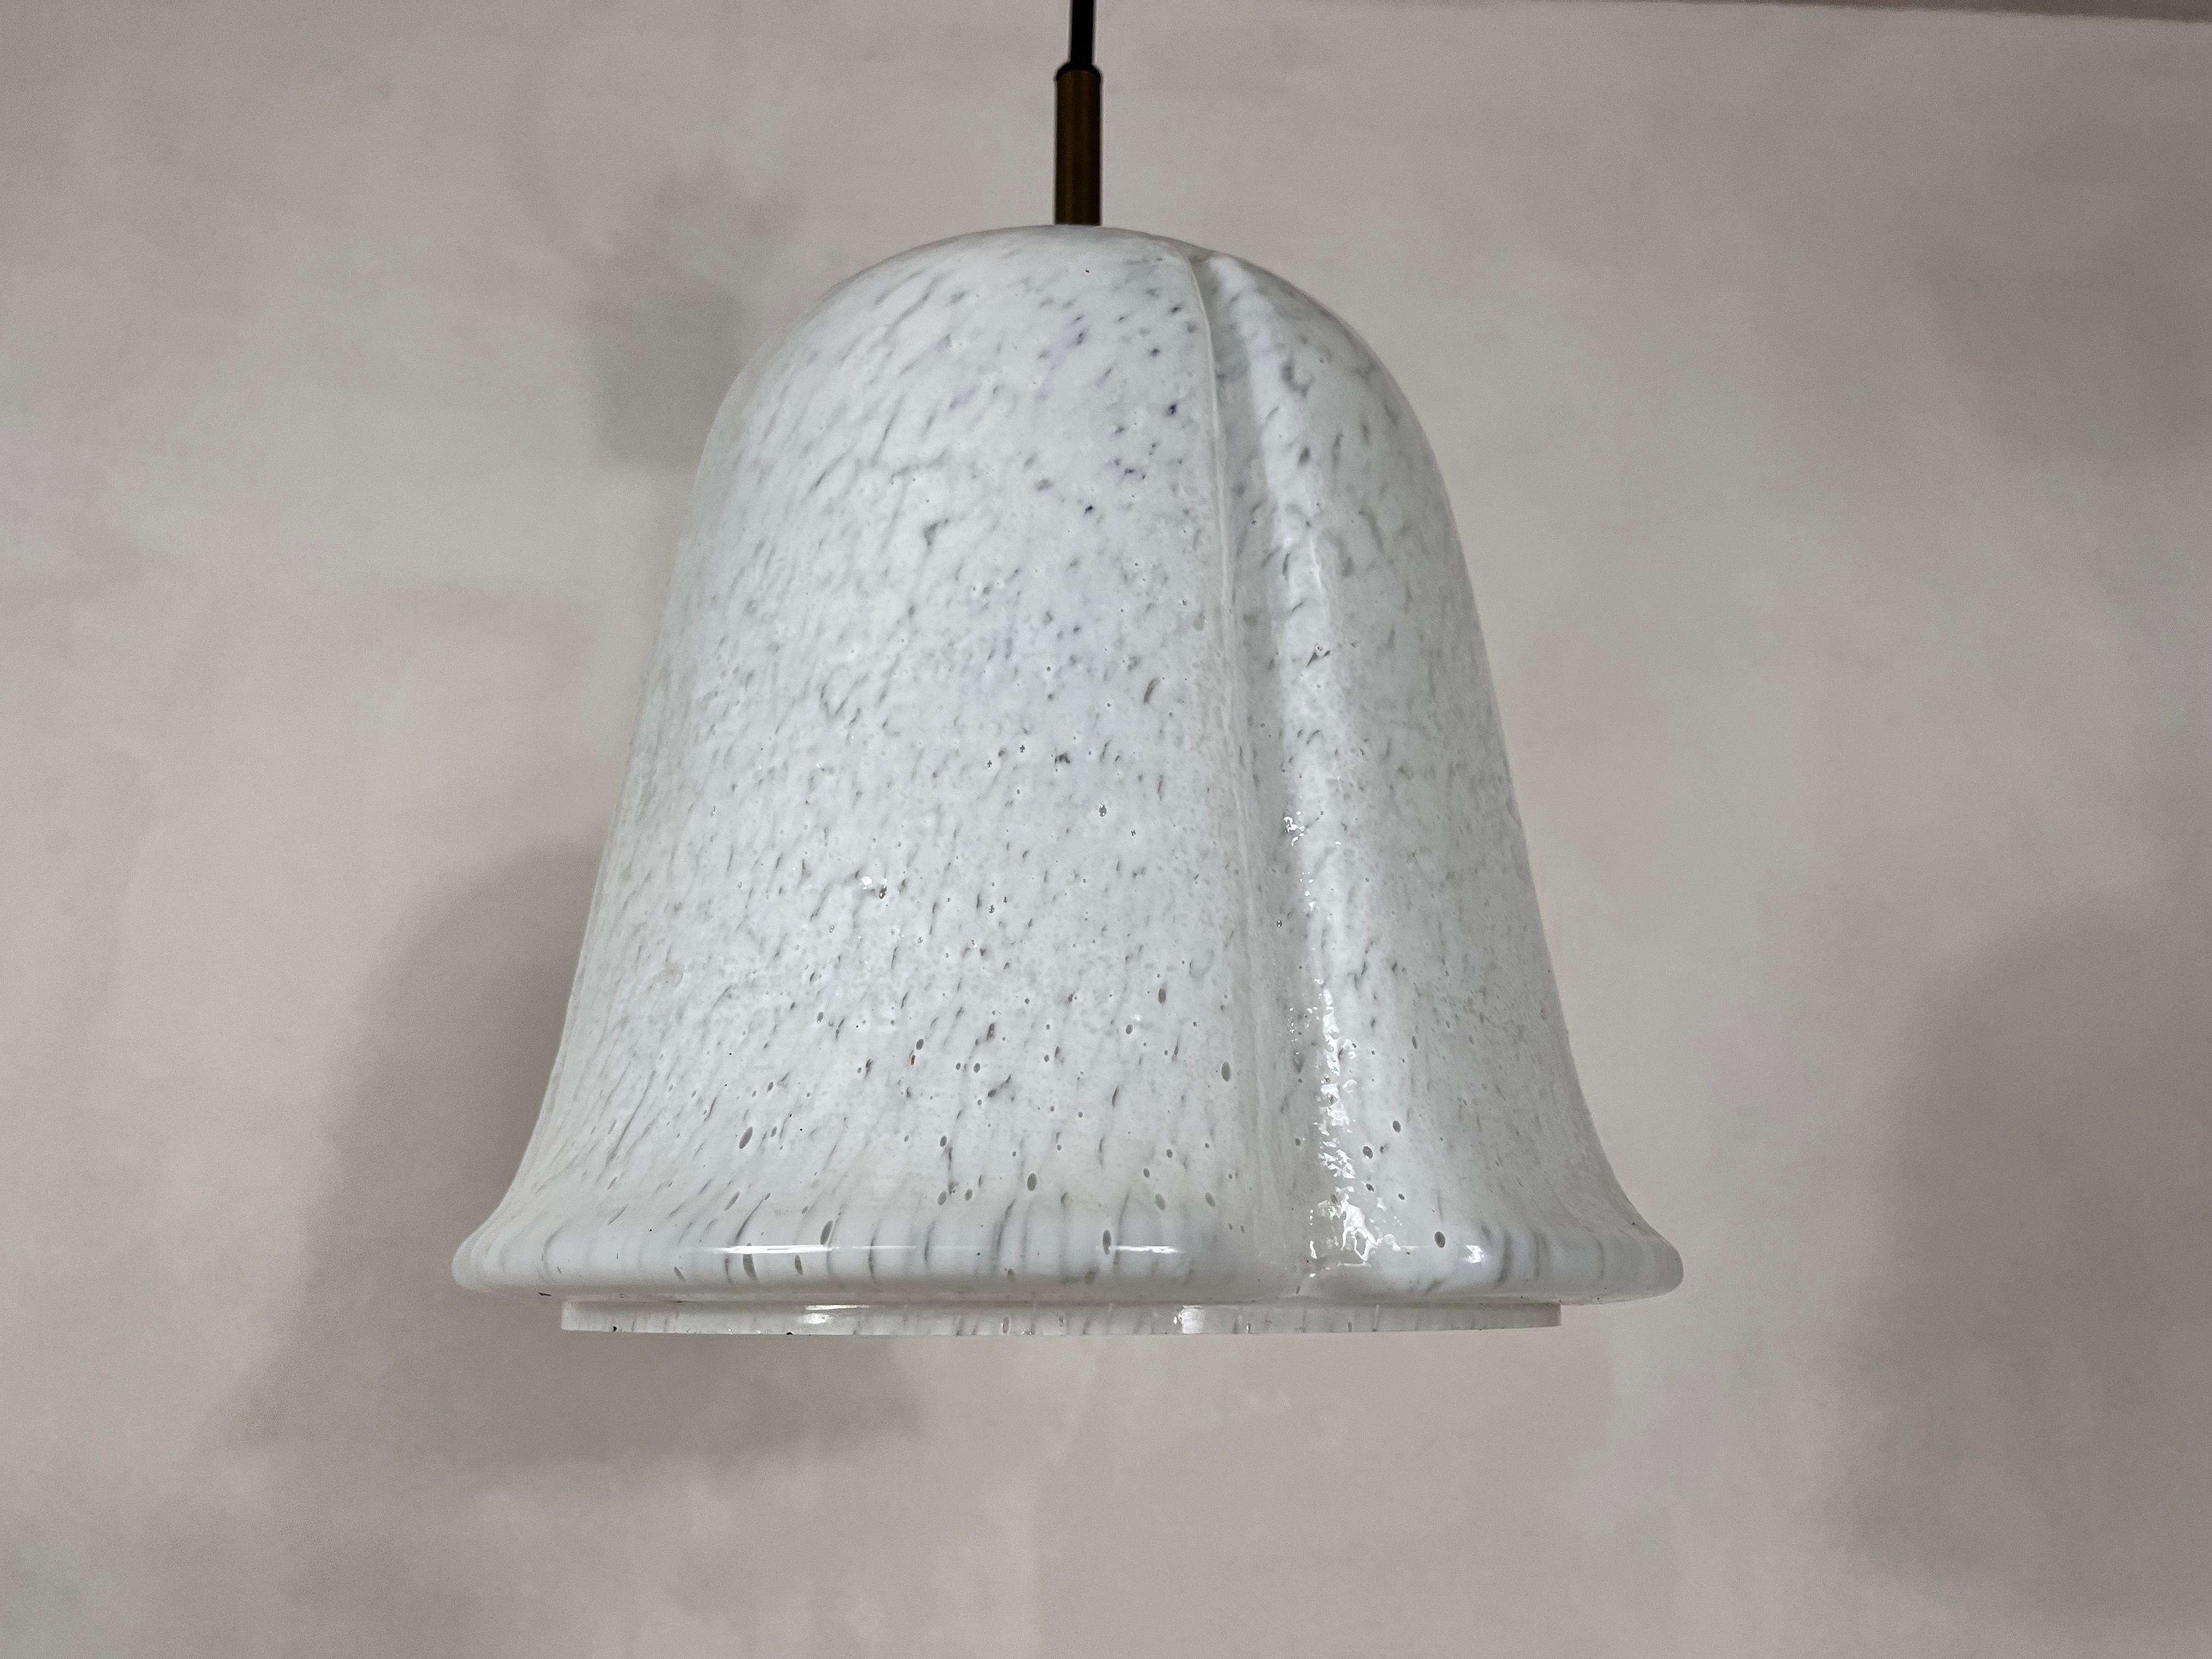 A Mid-Century Modern pendant lamp by Glashütte Limburg made in the 1960s in Germany. It is fascinating with its beautiful shape and bubble glass. The fixture has a very nice Minimalist design. Adjustable height from 55 up to 80 cm.

The light